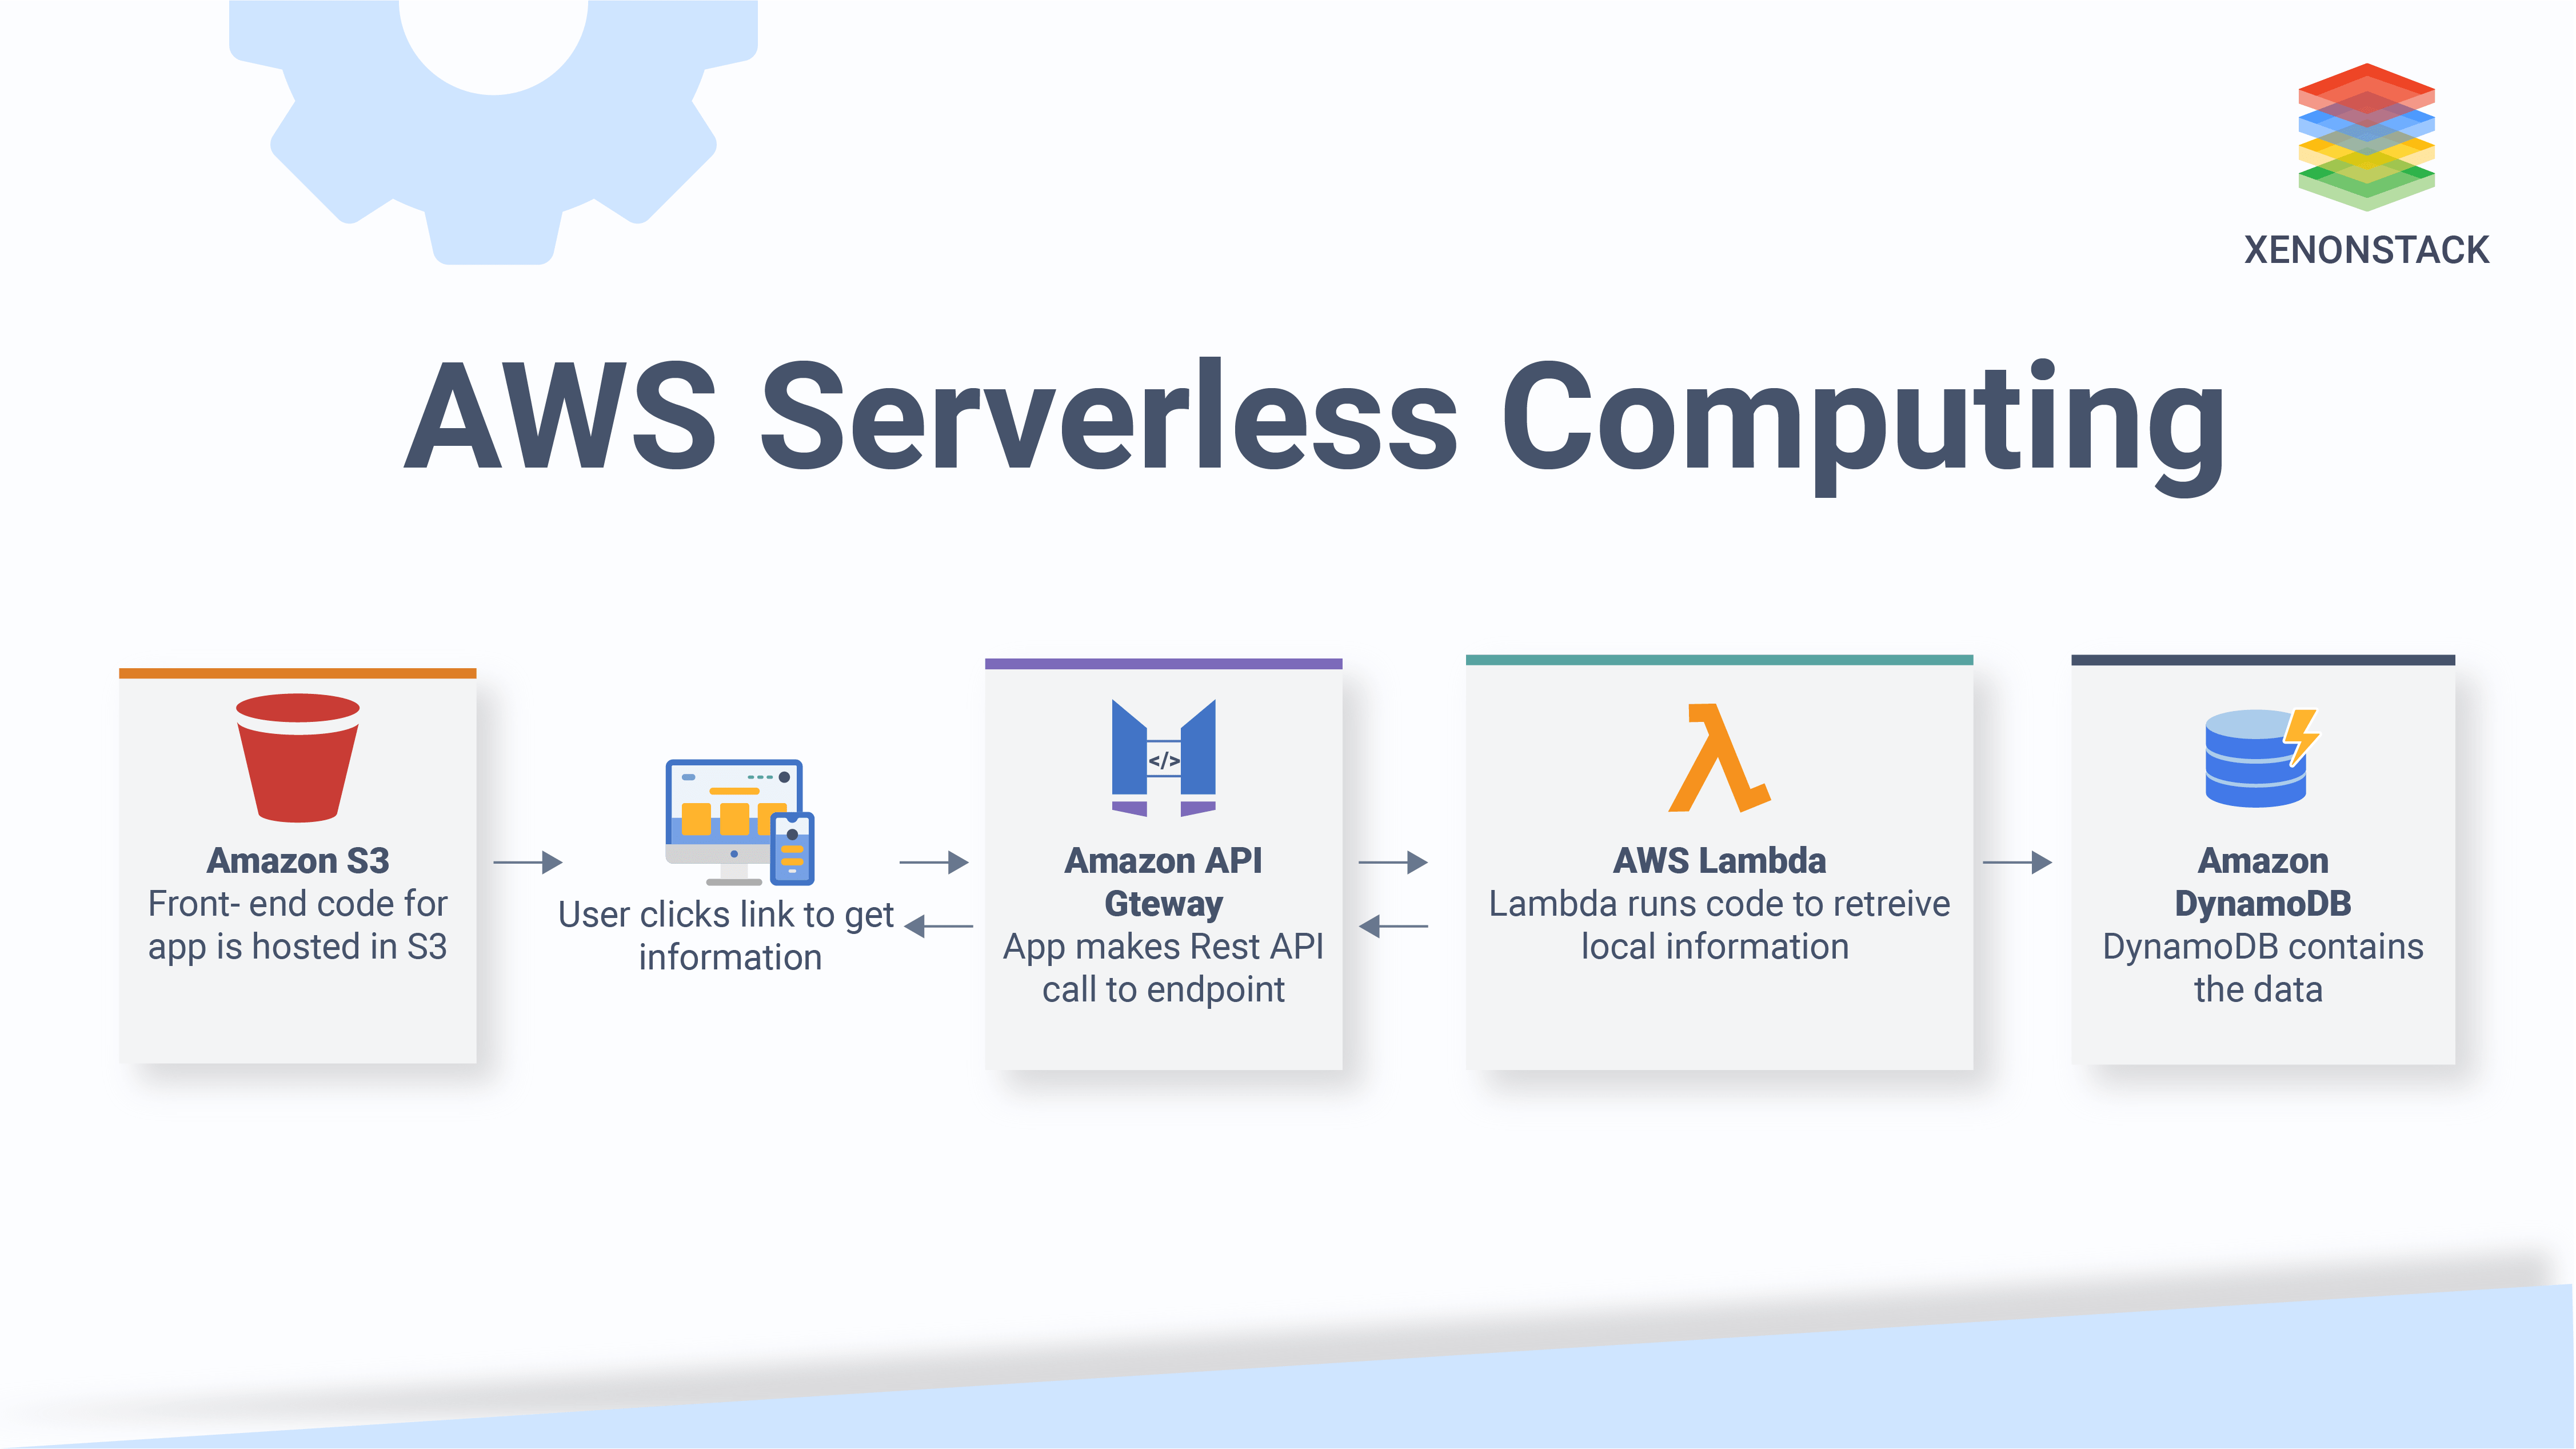 AWS Serverless Computing, Benefits, Architecture and Use-cases